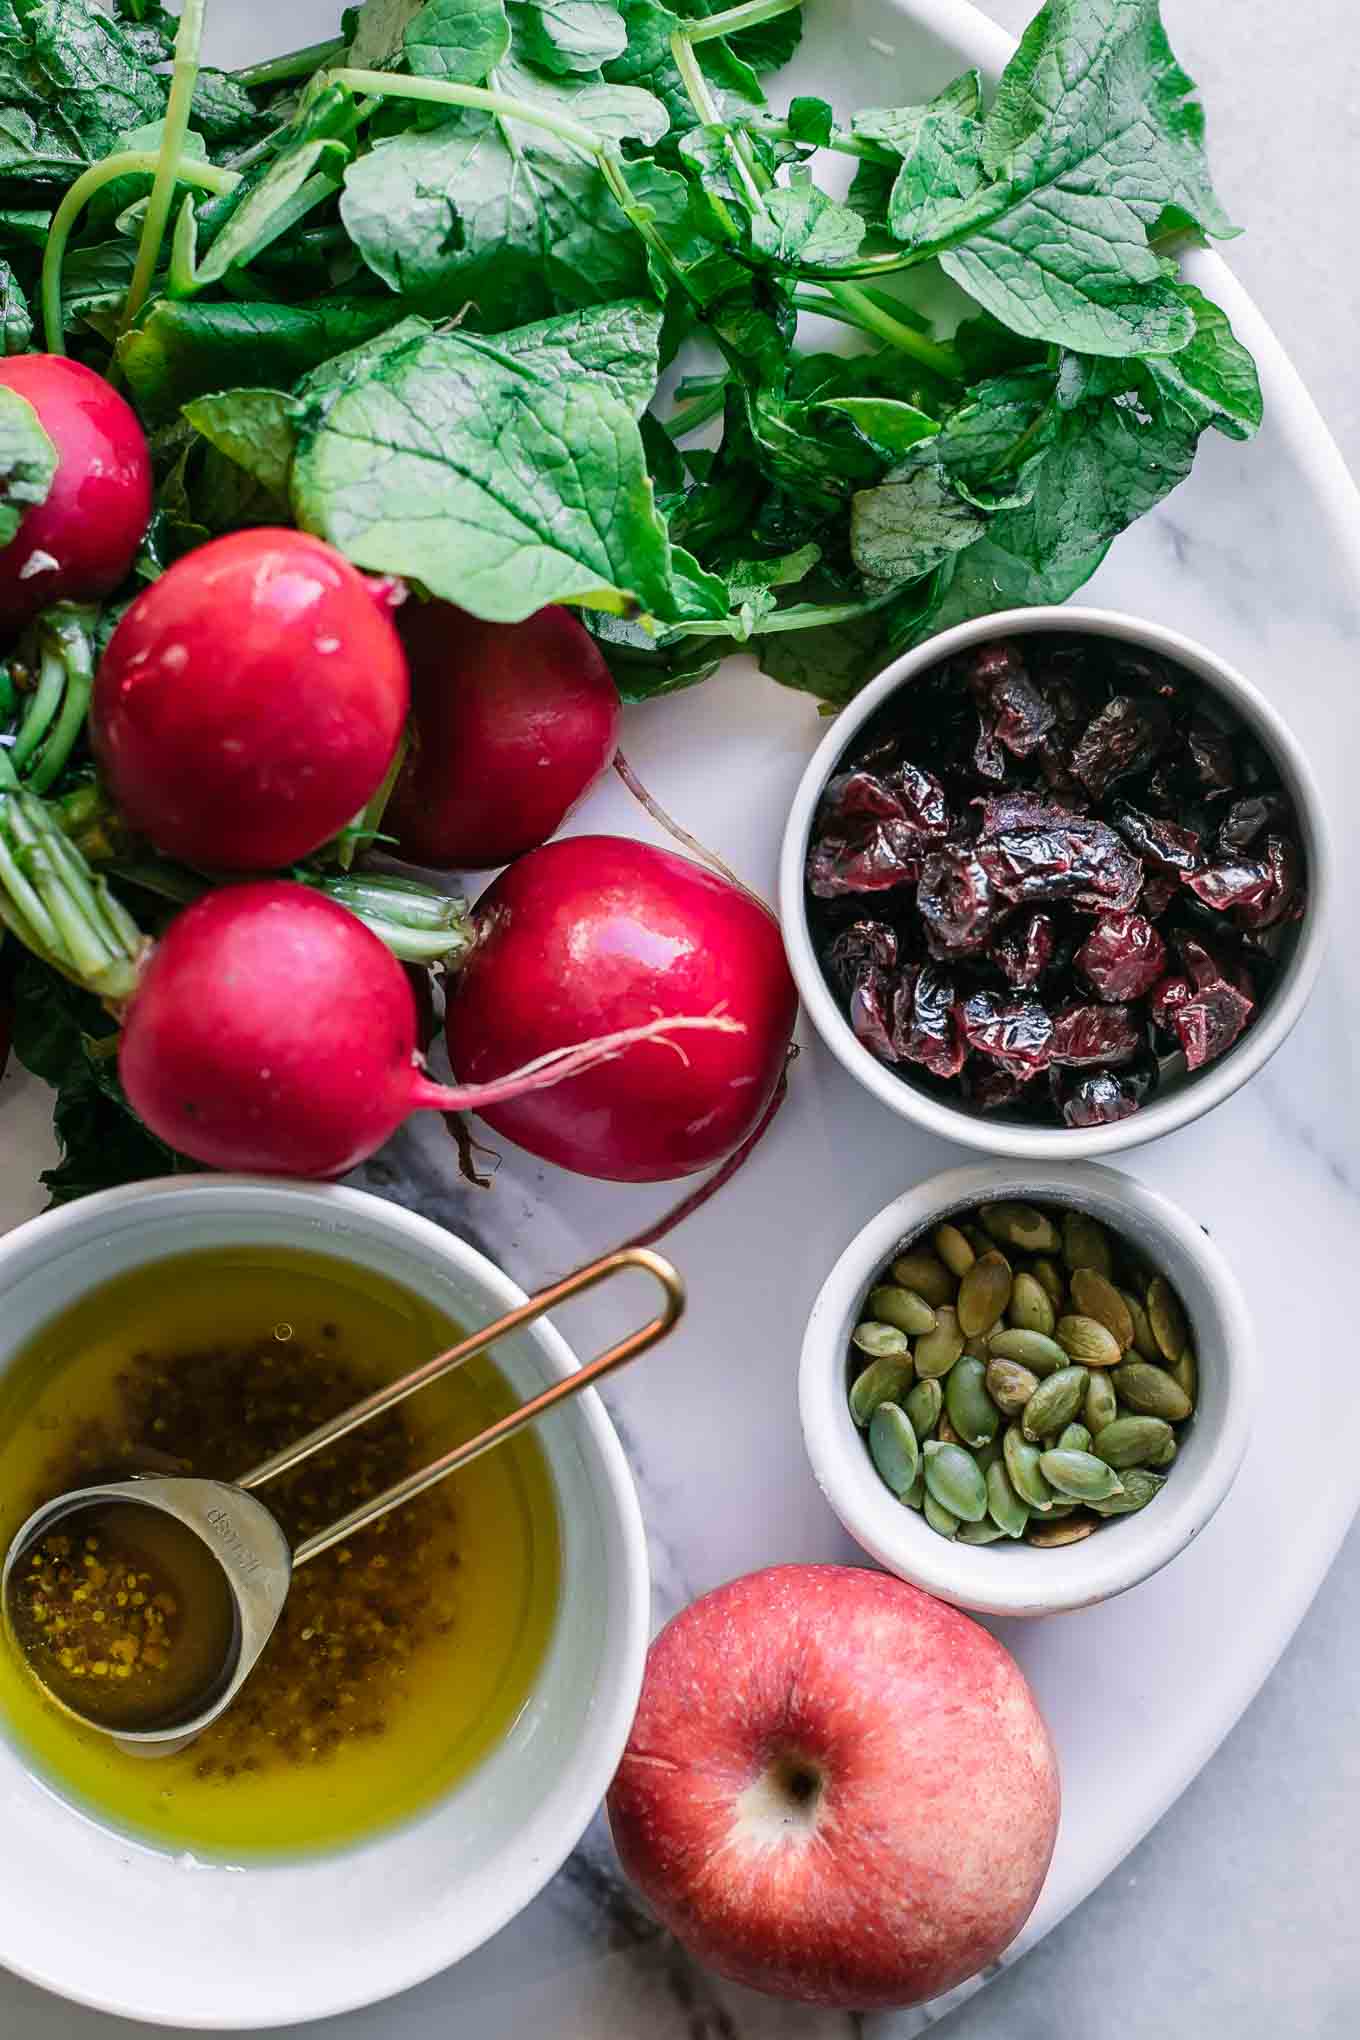 radishes with leaves, an apple, and bowls of cranberries, seeds, and salad dressing on a table